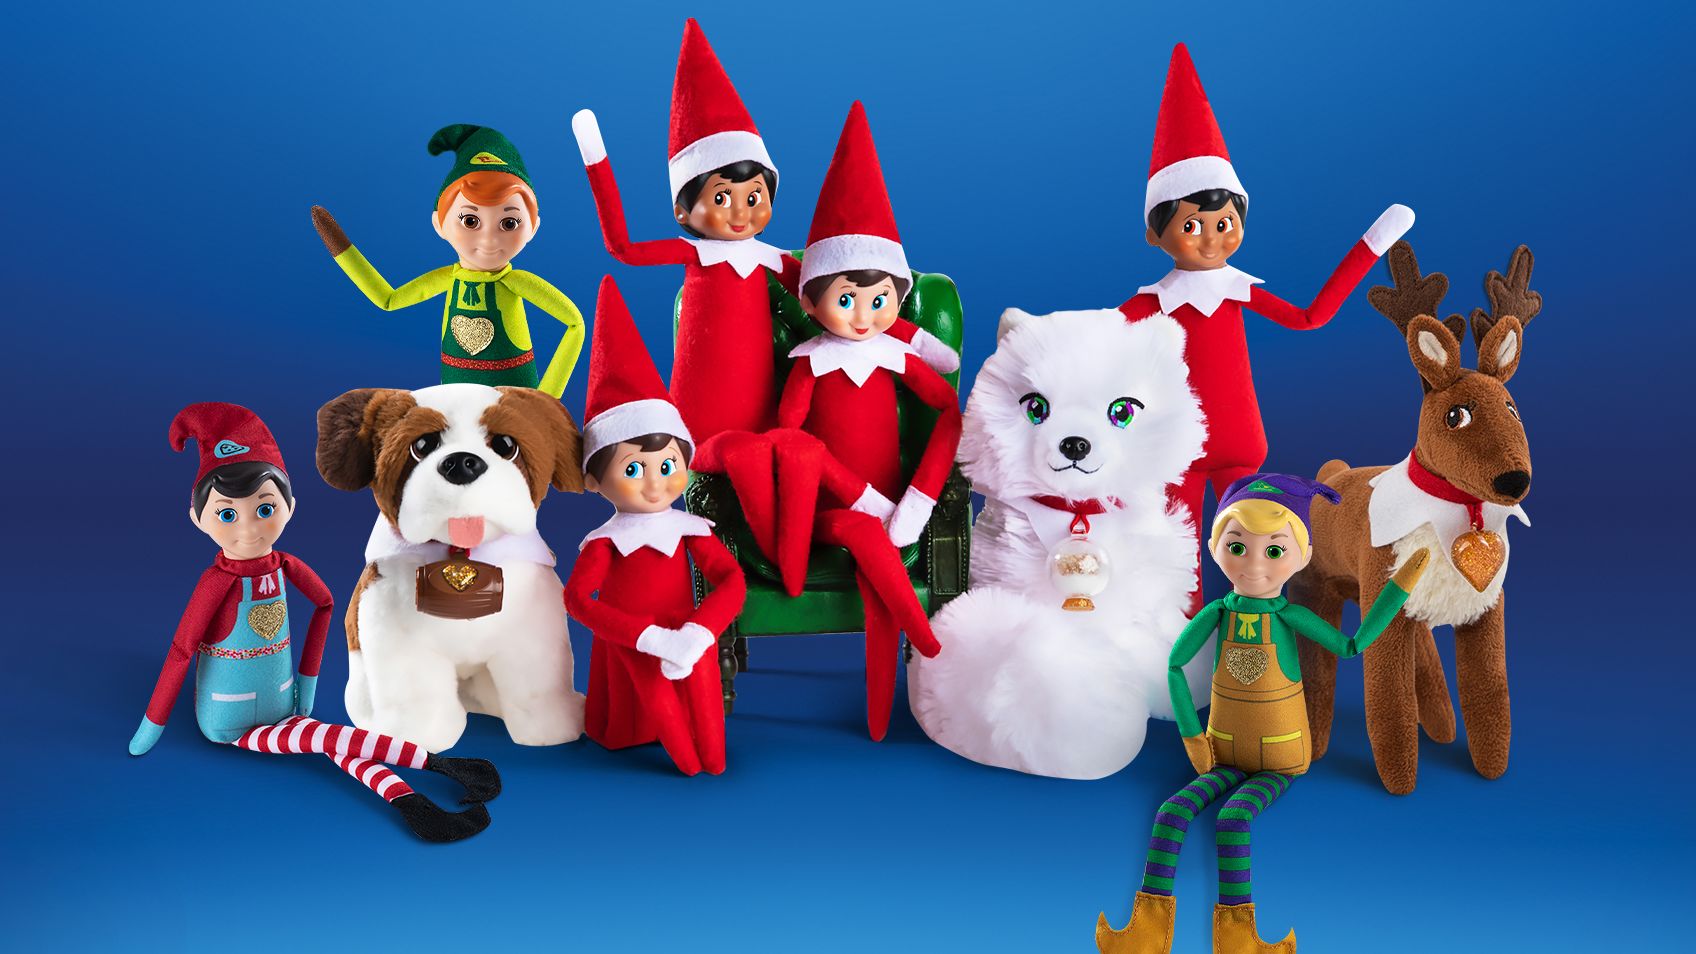 The Elf was a lot harder to get on your Shelf this year | CNN Business